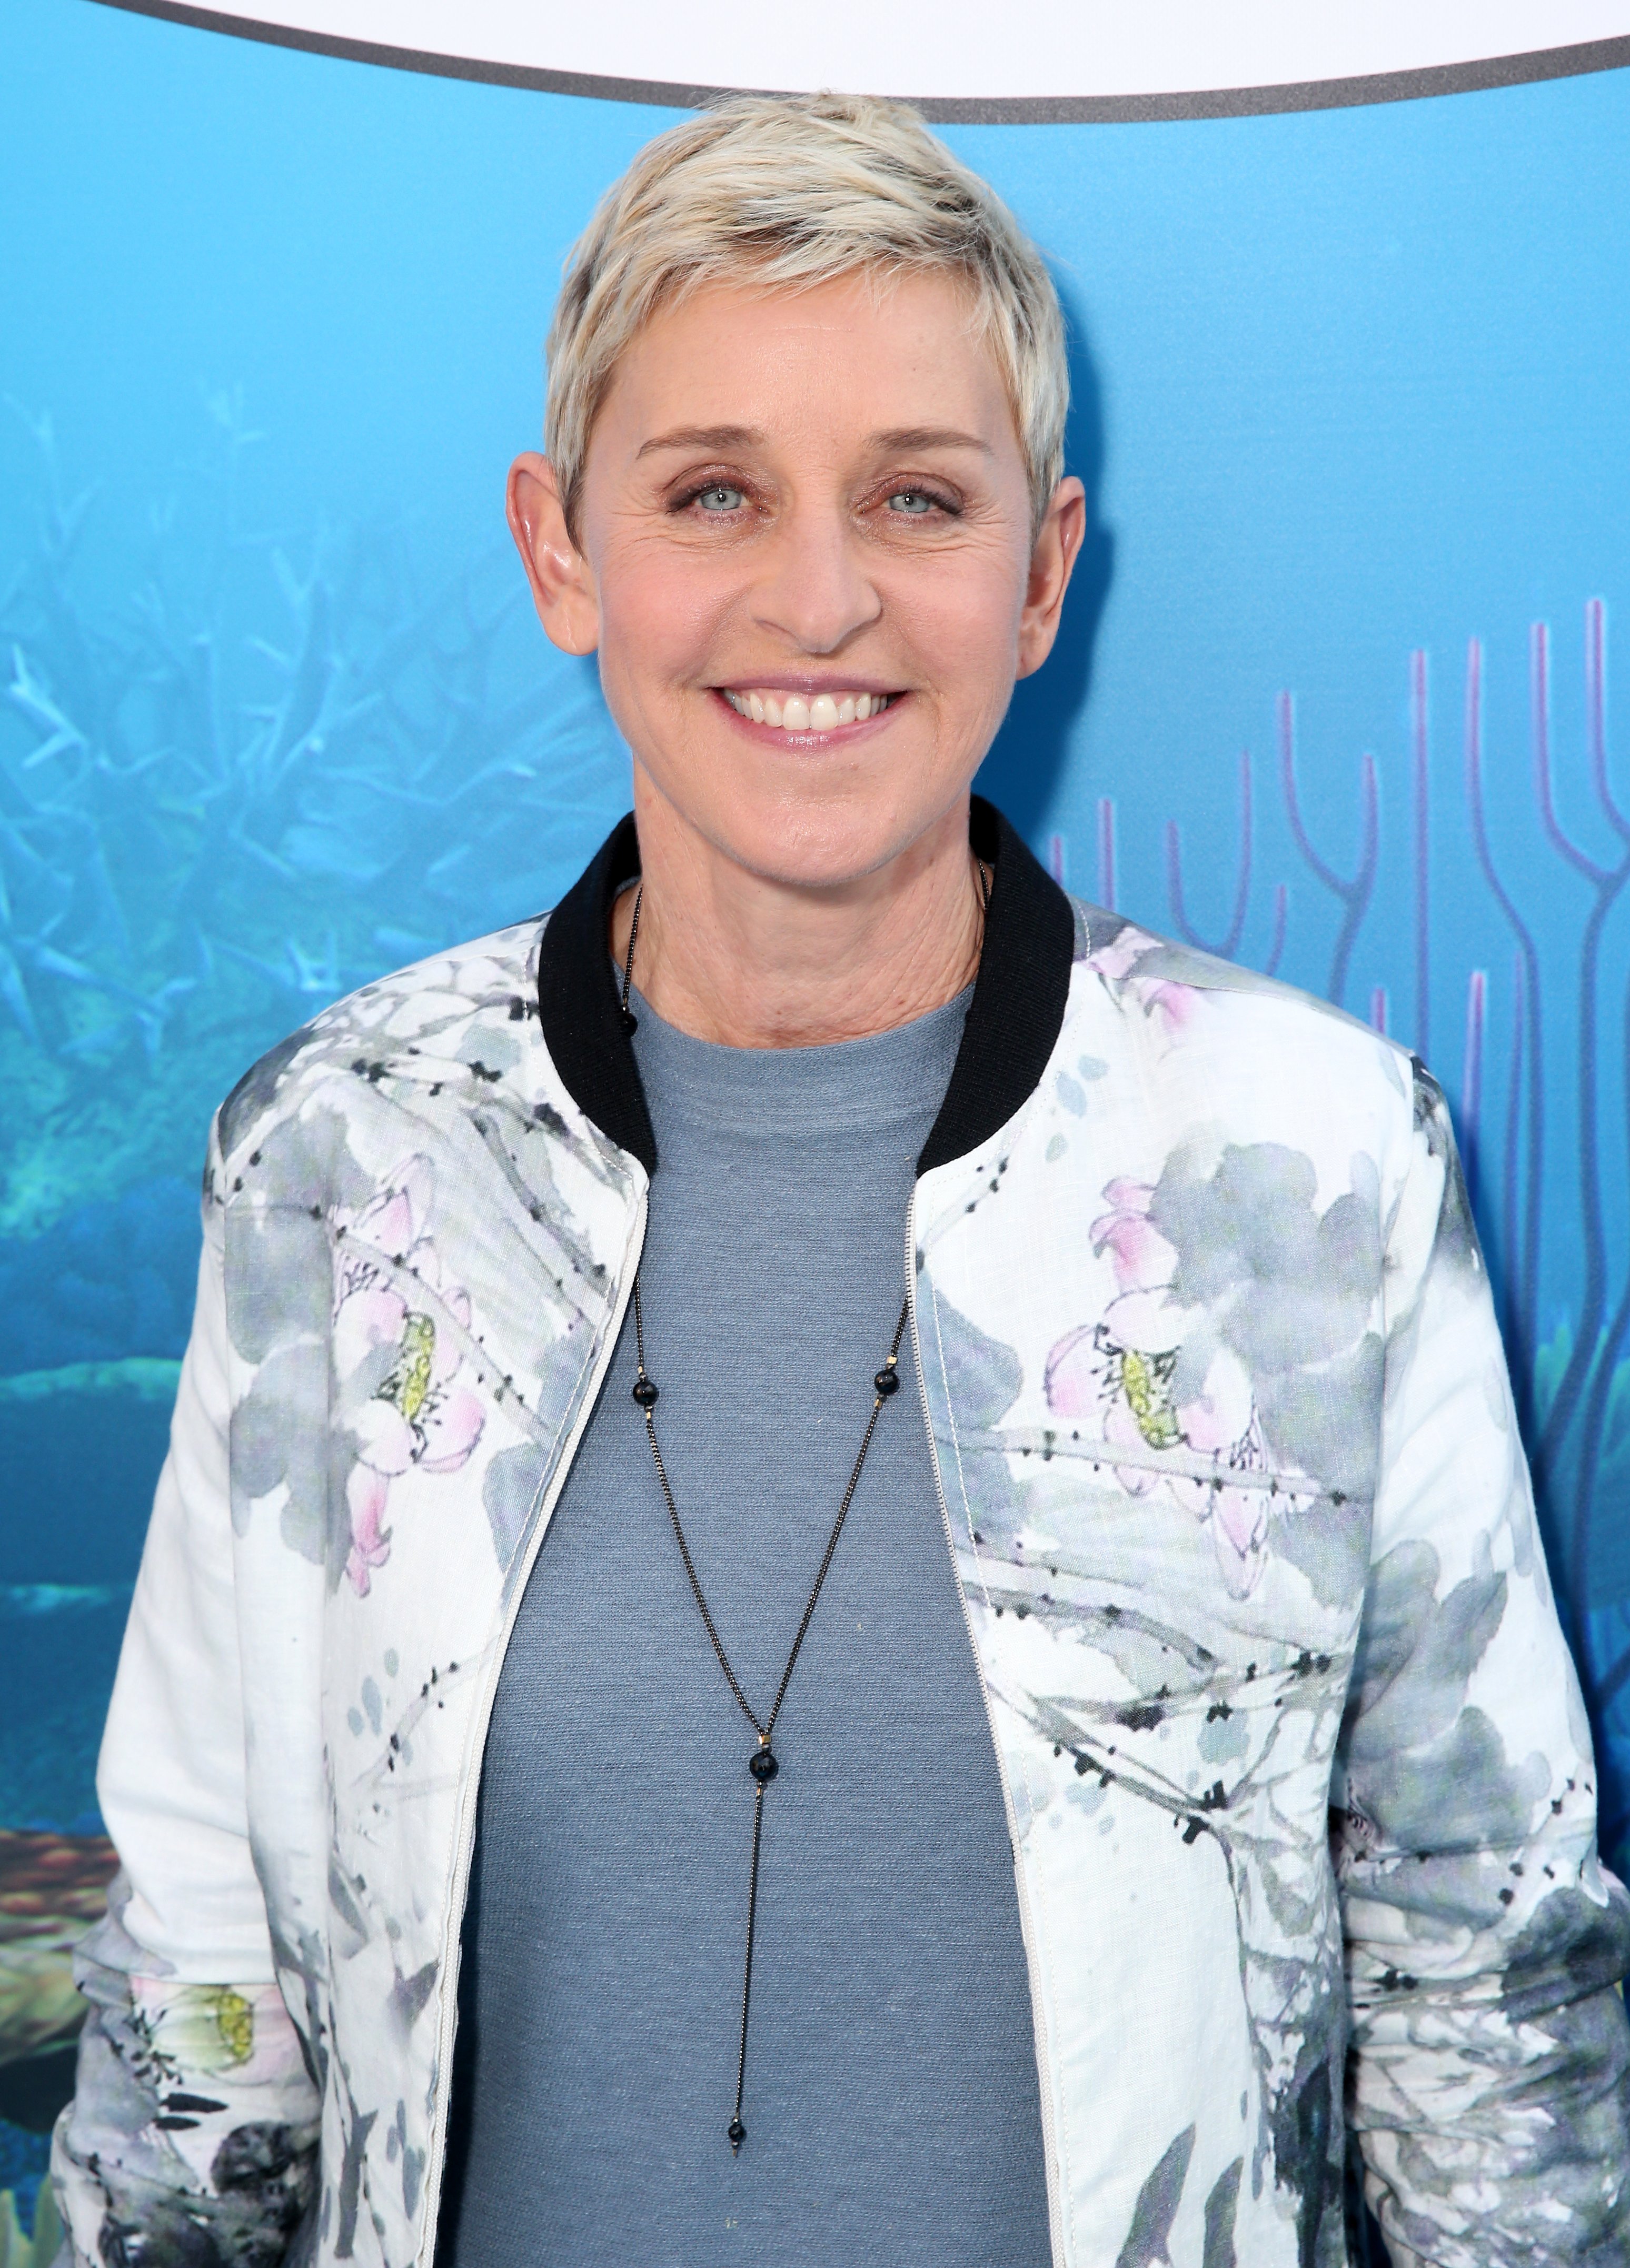  Ellen DeGeneres attends the world premiere of  'Finding Dory' on June 8, 2016, in Hollywood, California. | Source: Getty Images.